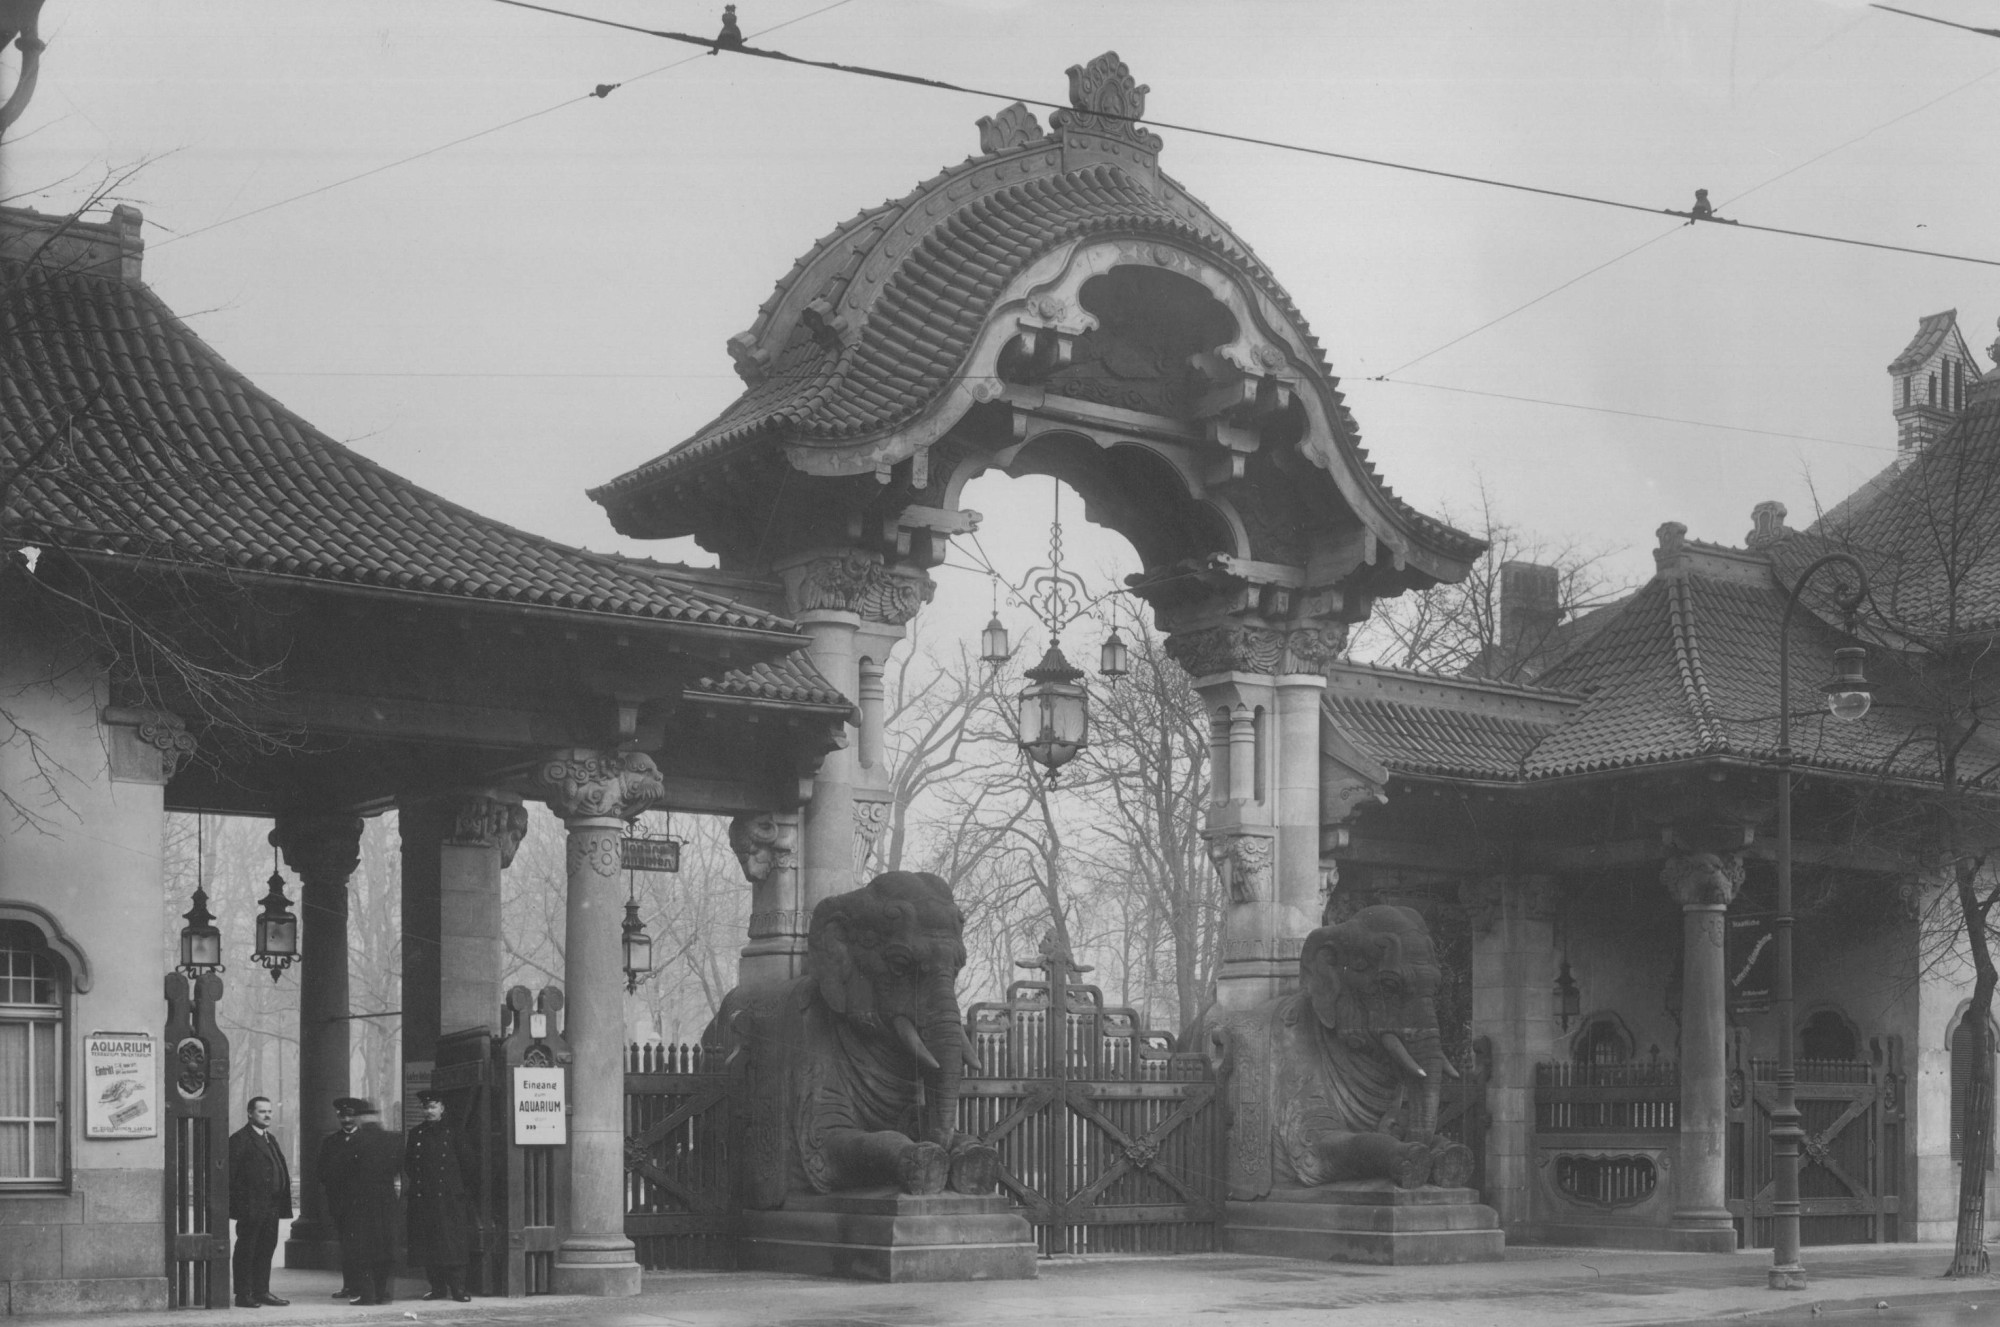 Black and white photograph: Gateway to Berlin Zoo supported by two elephant sculptures. Three men are standing in front of the entrance, two of them wearing zoo staff uniforms.